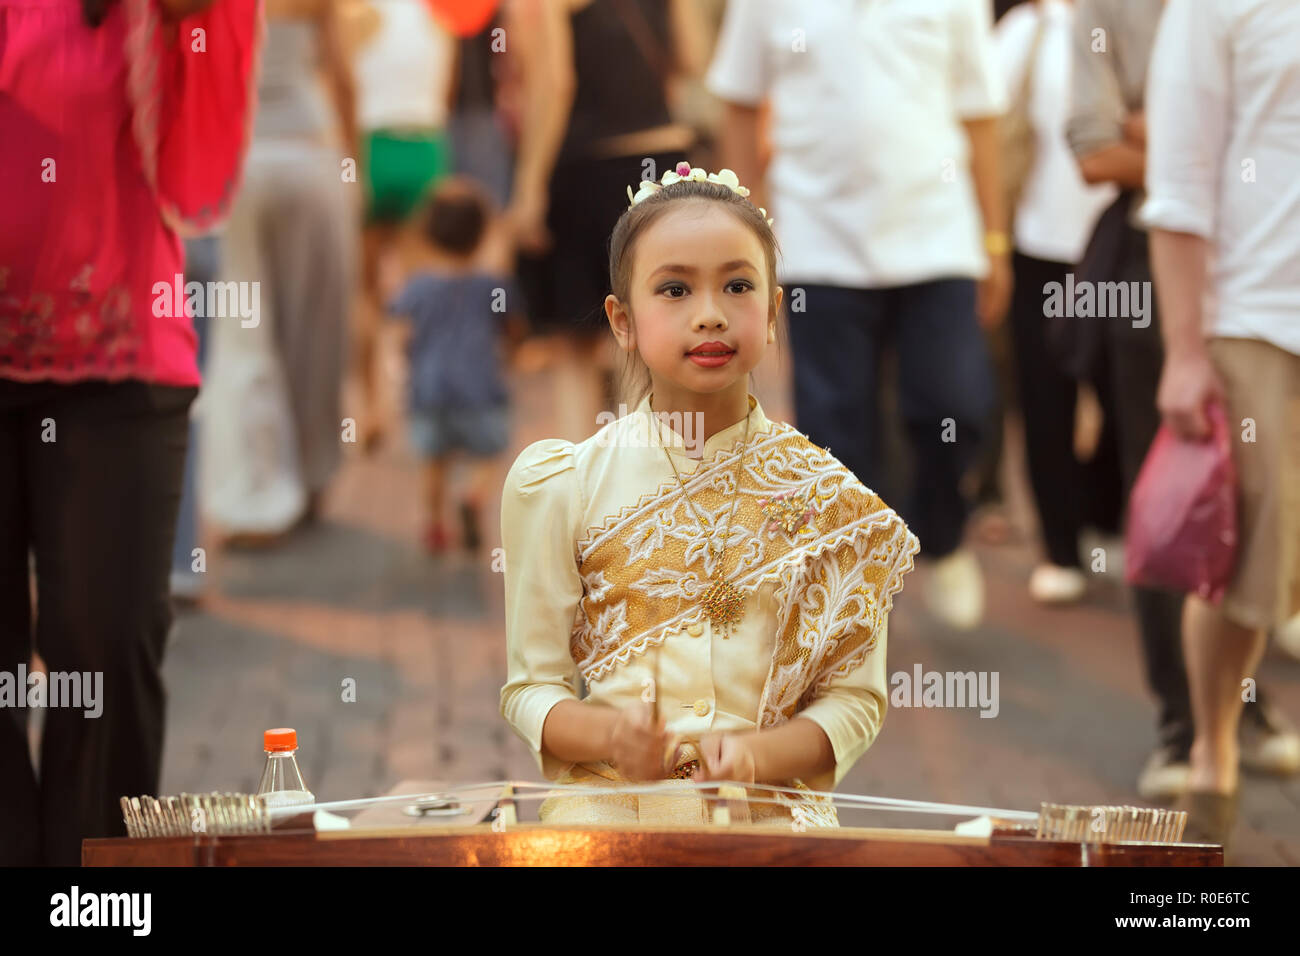 CHIANG MAI, THAILAND, FEBRUARY 26, 2012: A little girl dressed in traditional clothes is playing dulcimer instrument in the street during the week-end Stock Photo